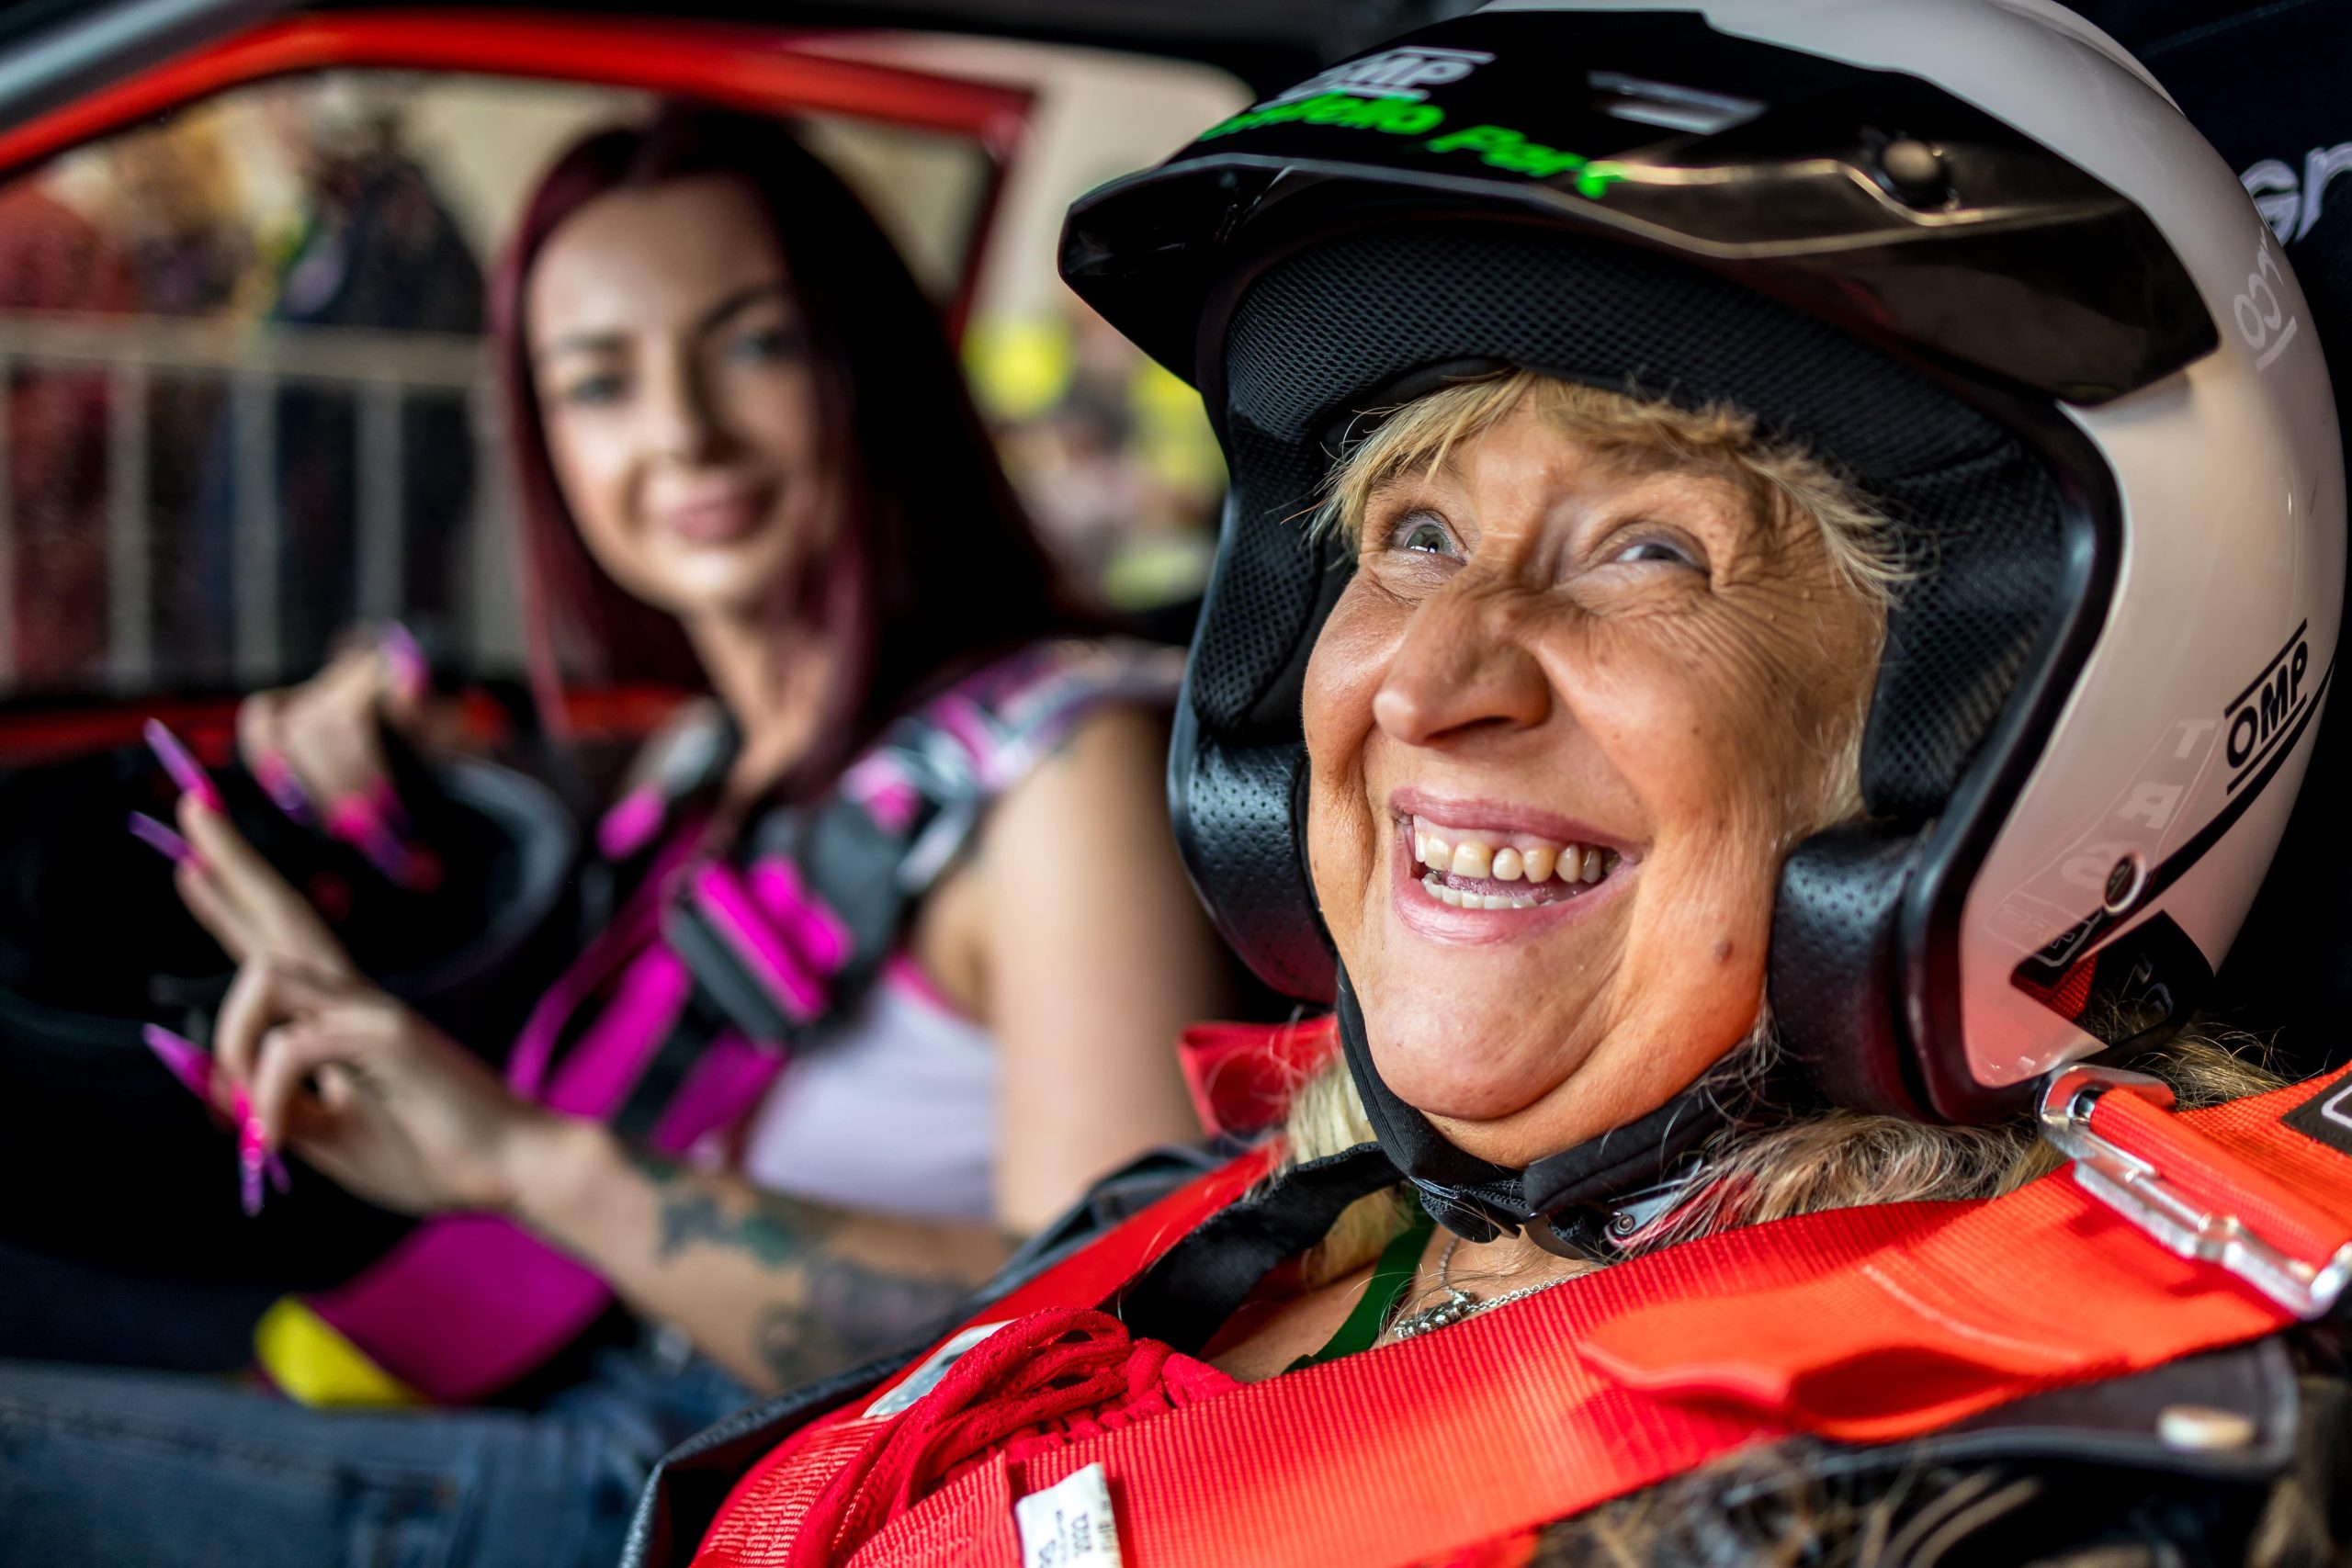 A participant wearing a helmet and sitting in the passenger seat of a rally car, smiling at the camera at #ZeroLimits23. The rally driver is visible in the background.